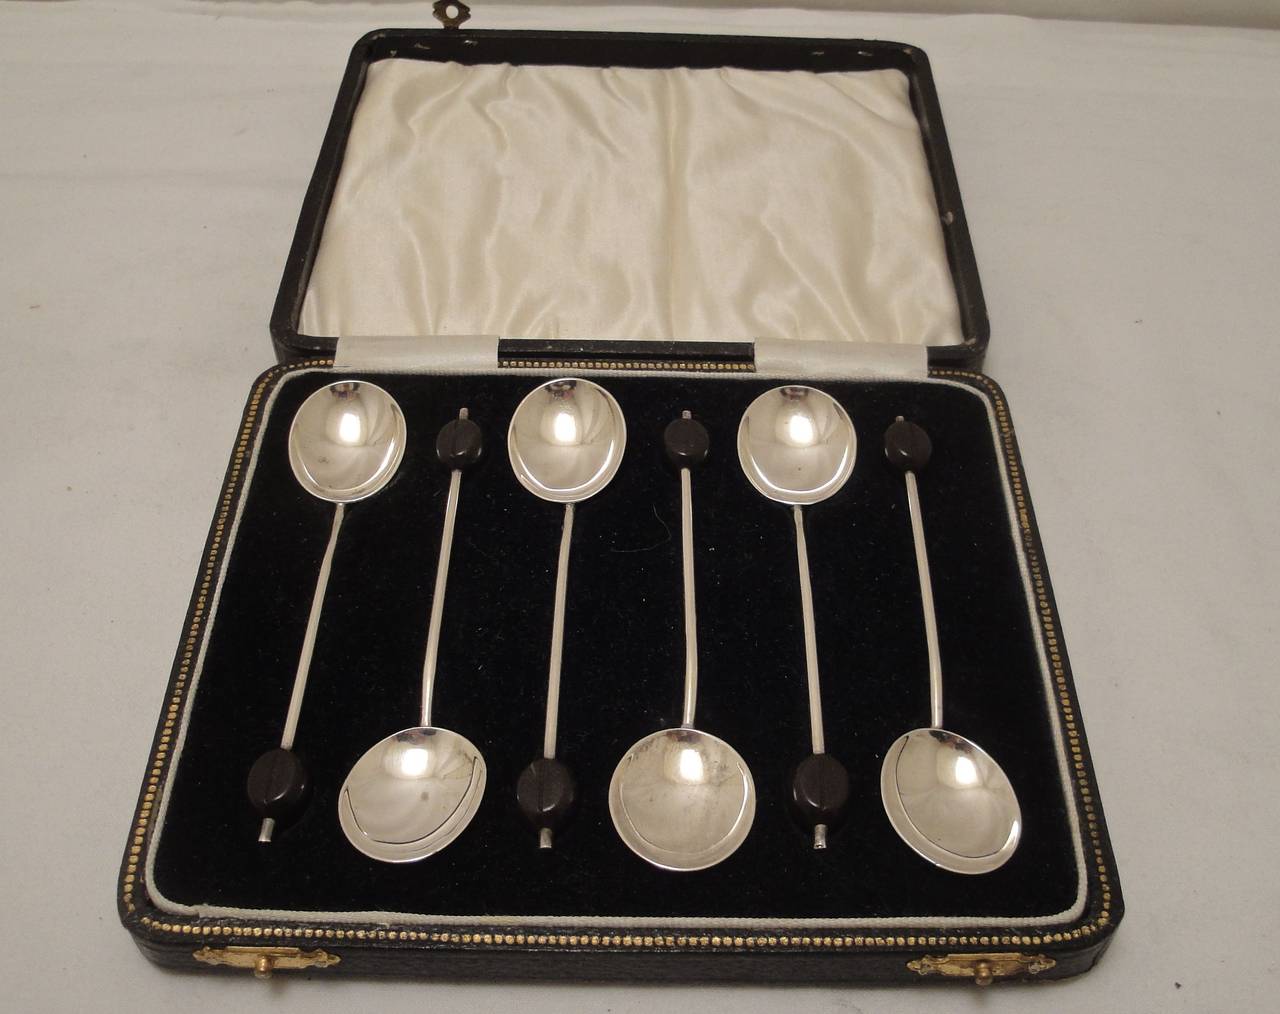 A super ser of 6 boxed  coffee spoons in sterling silver
Hallmarked Birmingham Uk 1931 date letter G
Great Condition
Spoons are 10cm long.